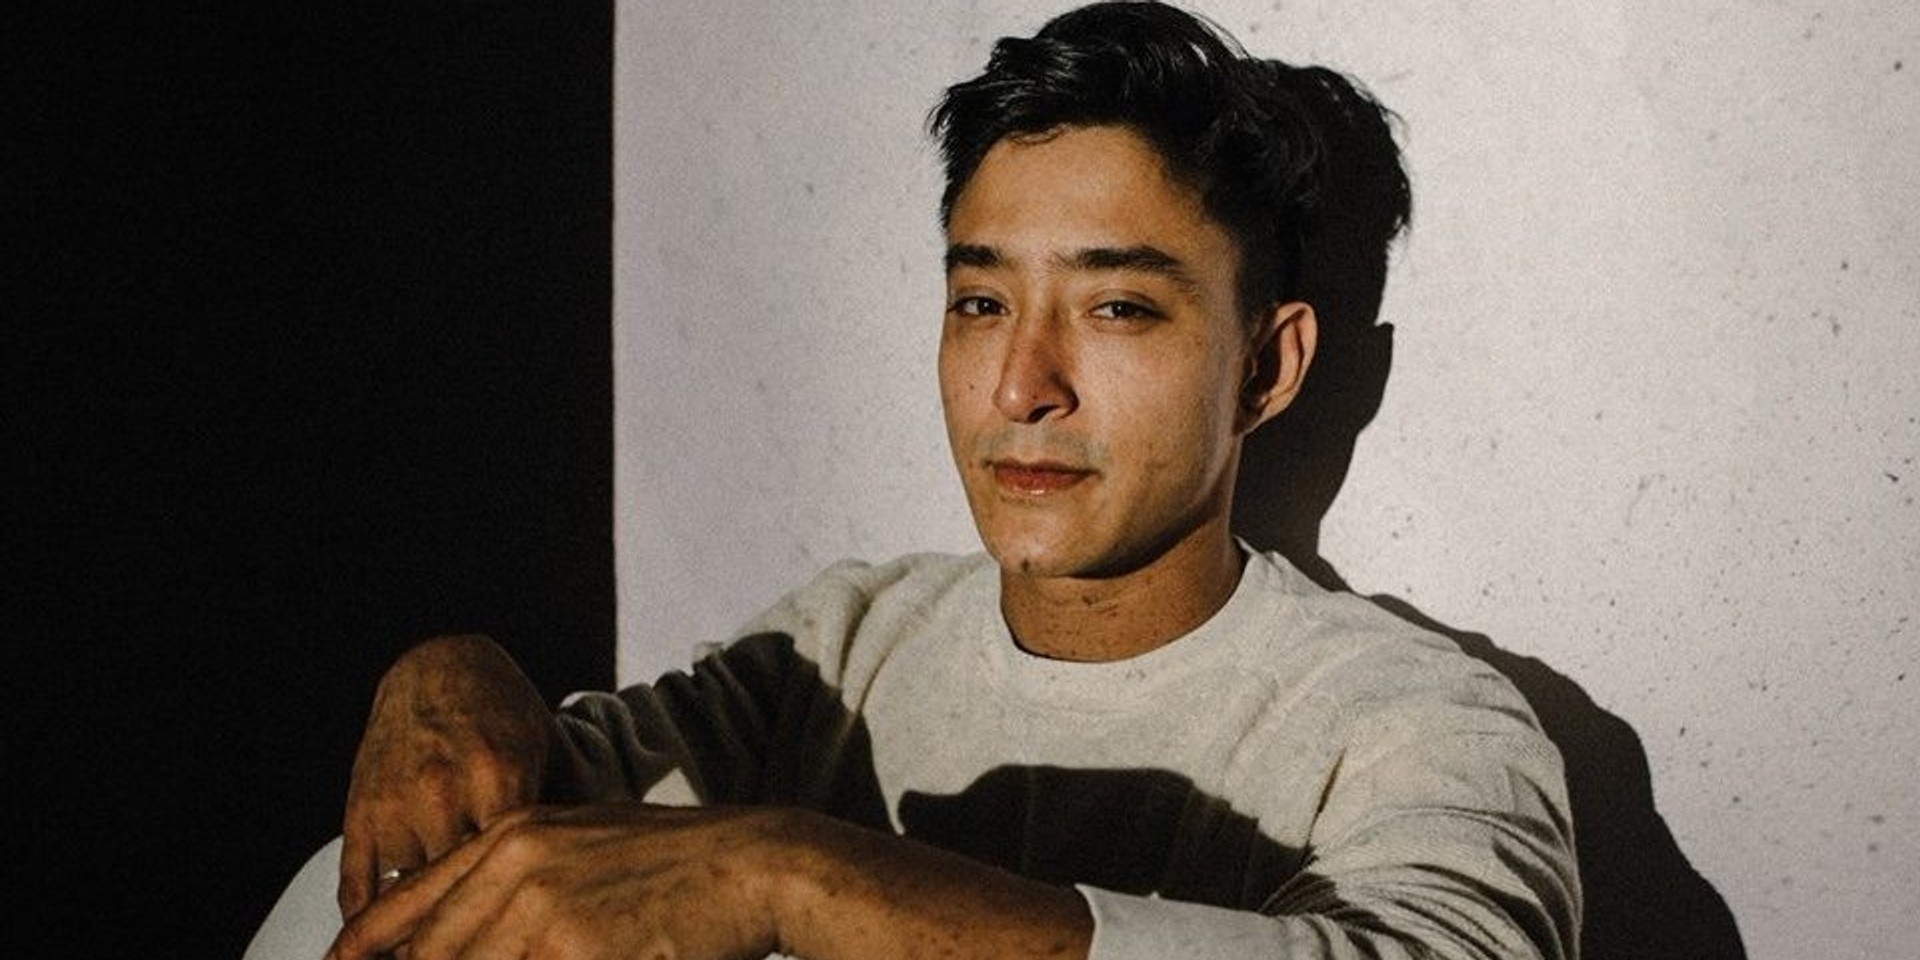 Shigeto to play debut show in Singapore in May